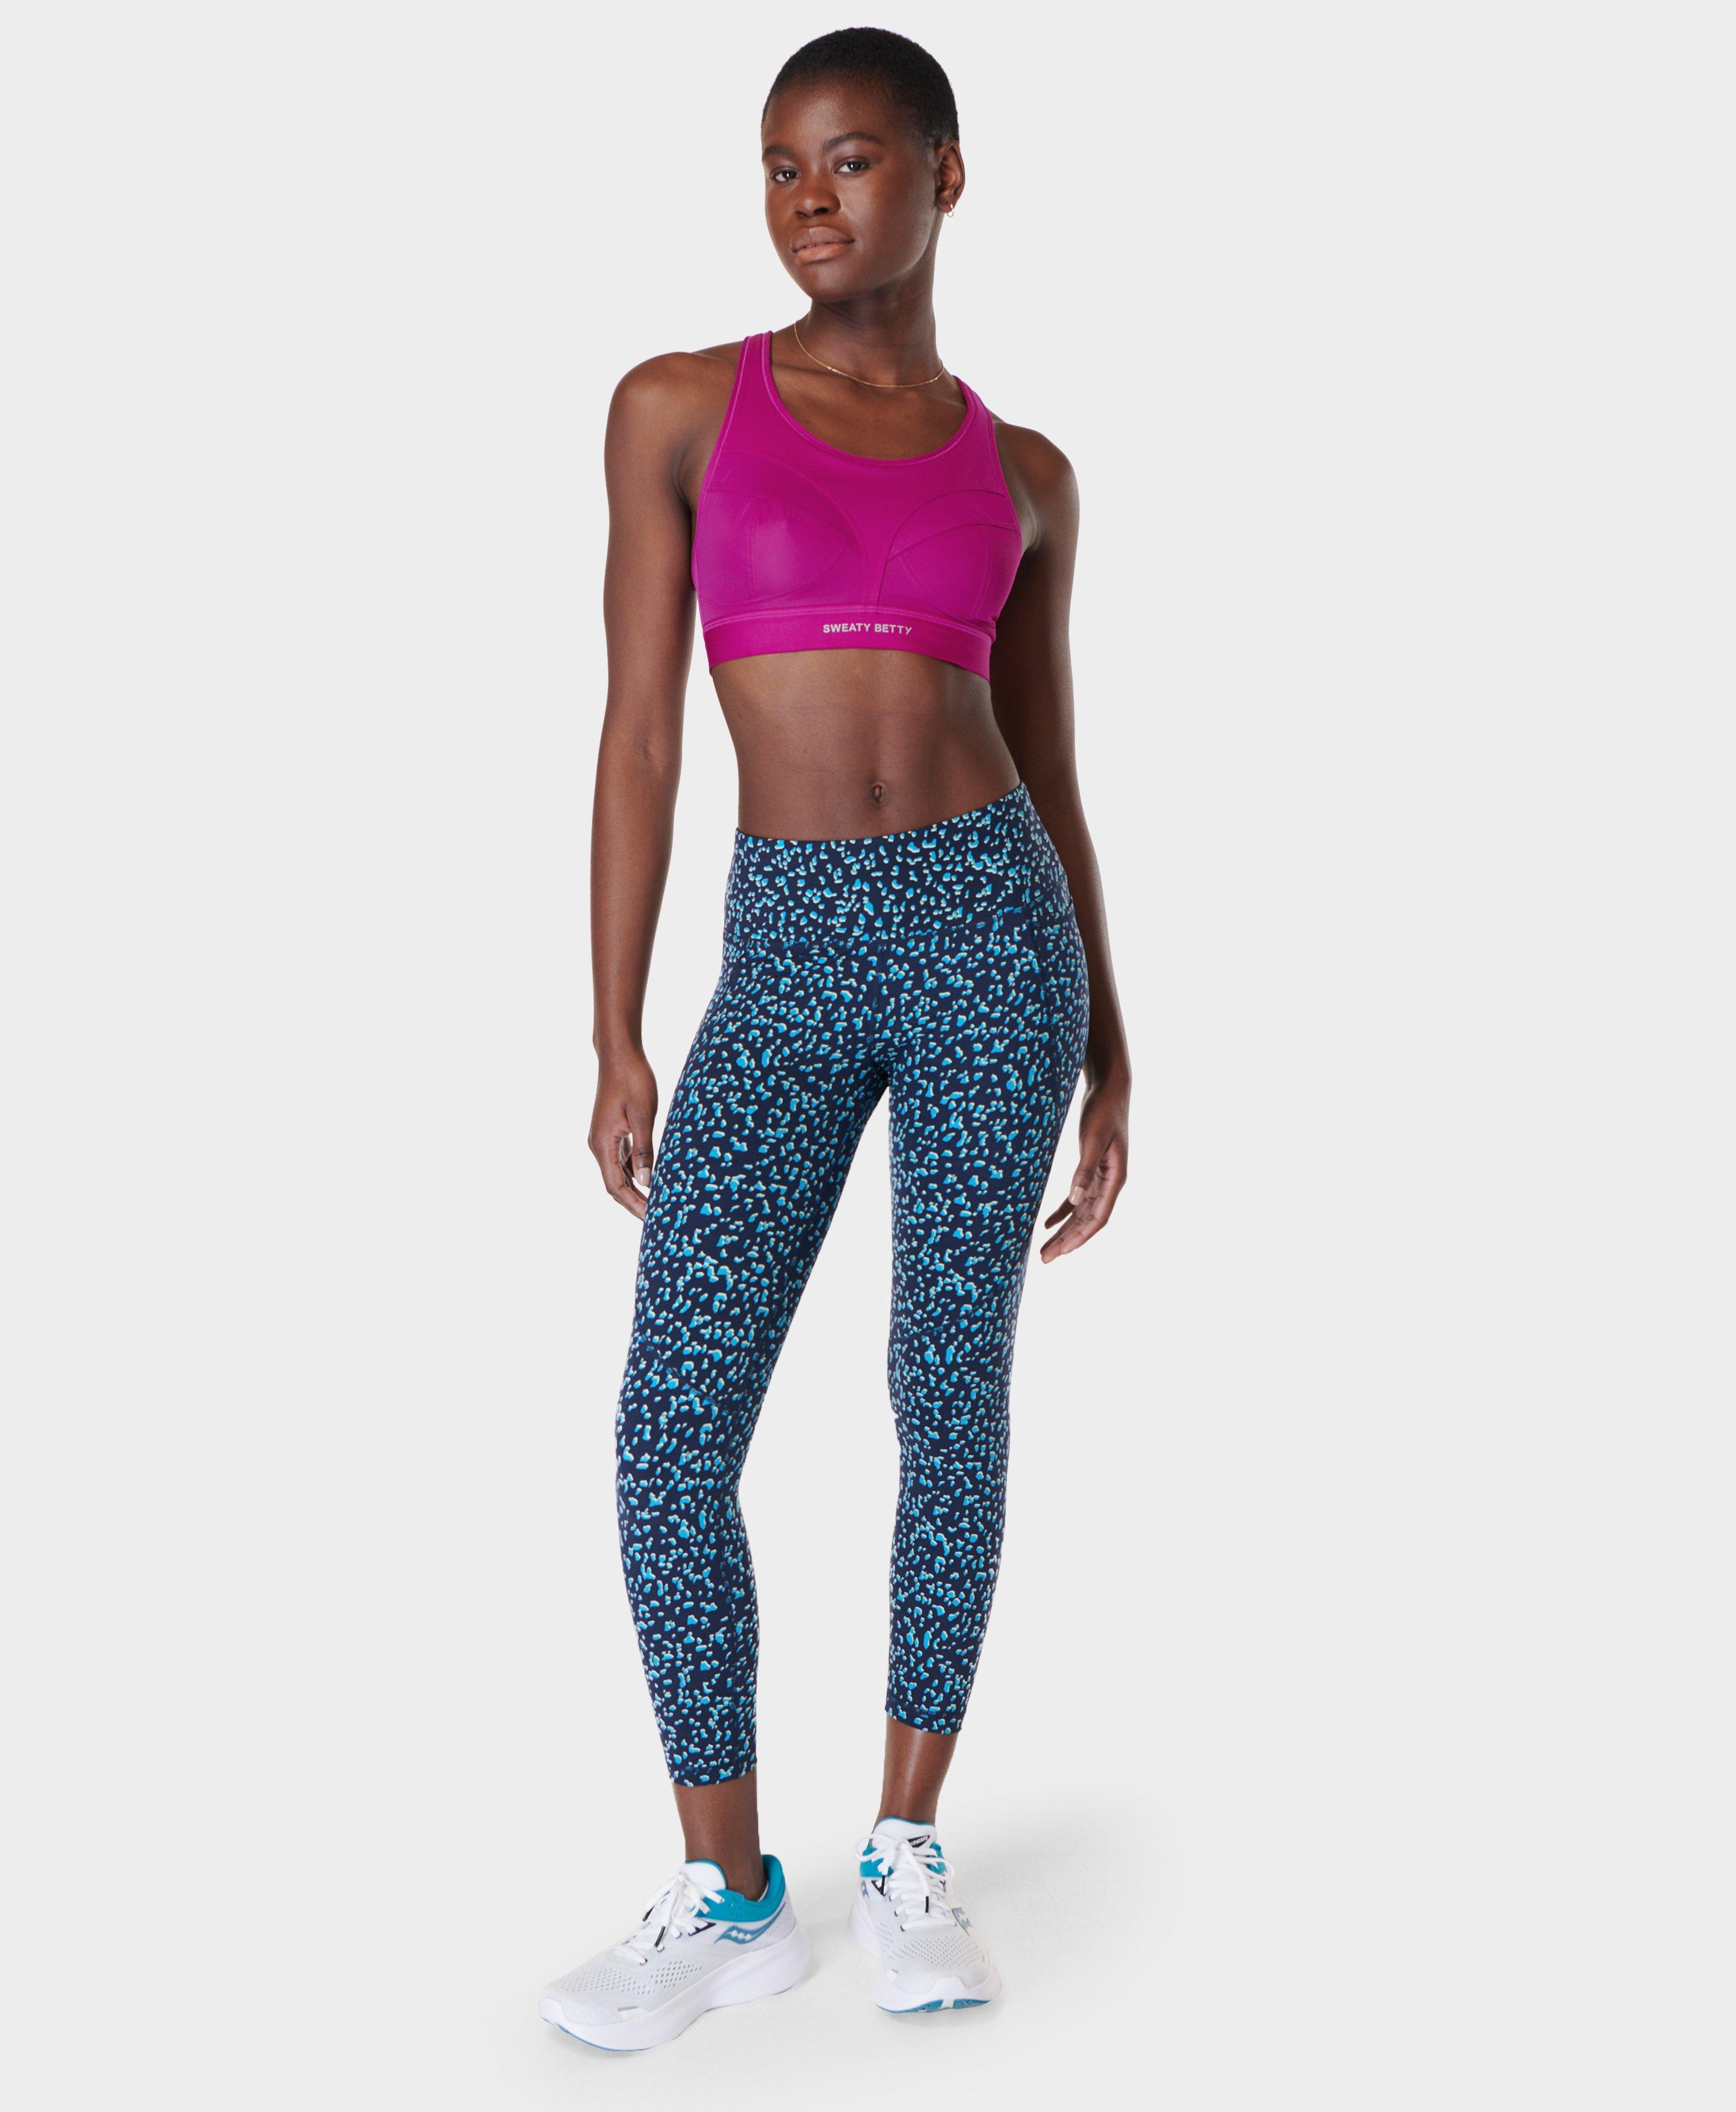 Activewear Tights and Workout Leggings on Sale - Running Bare